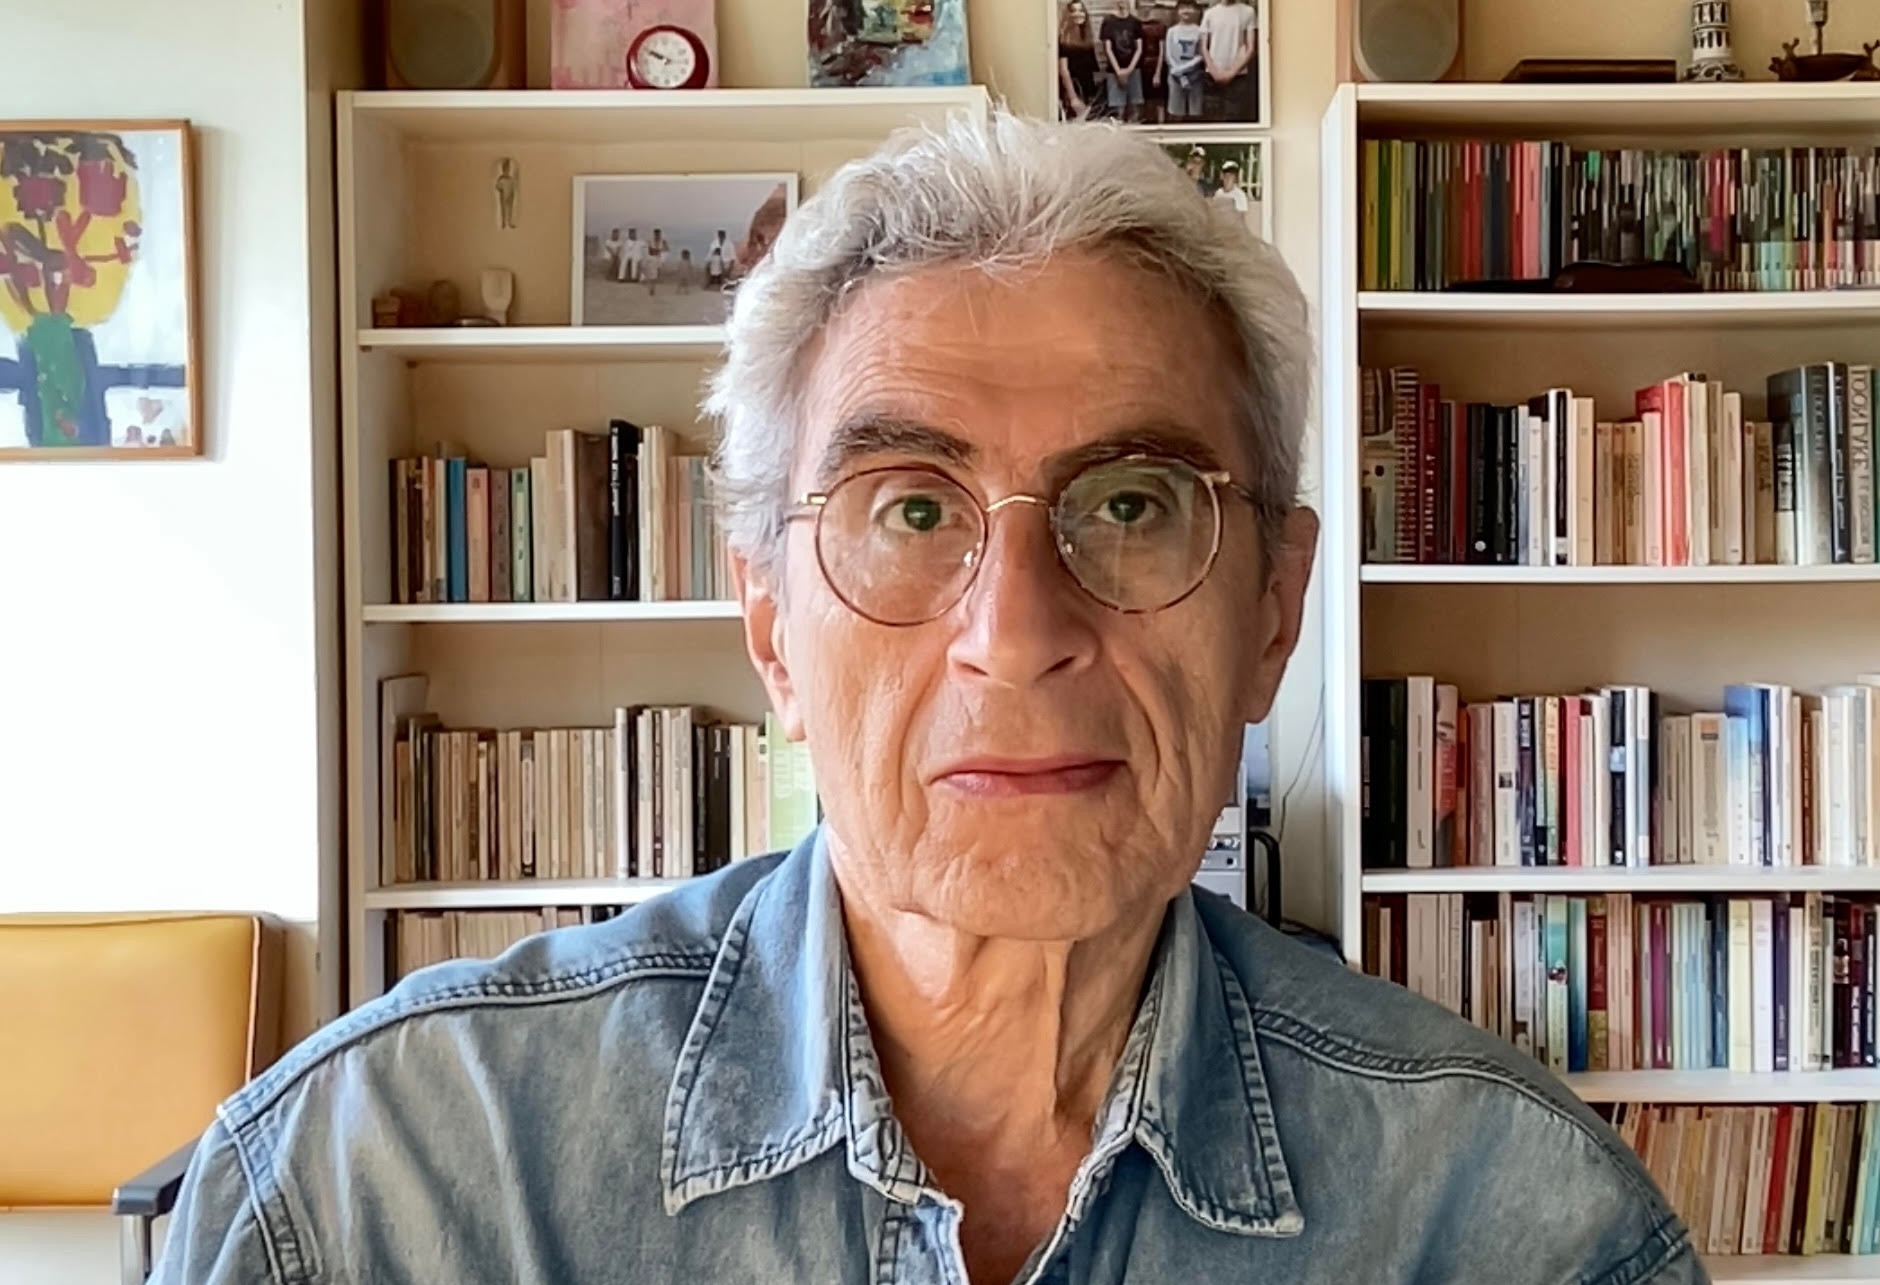 A man with white hair sits in front of bookshelves filled with books and framed photographs. He is wearing brown, round-framed glasses and a light jean shirt.